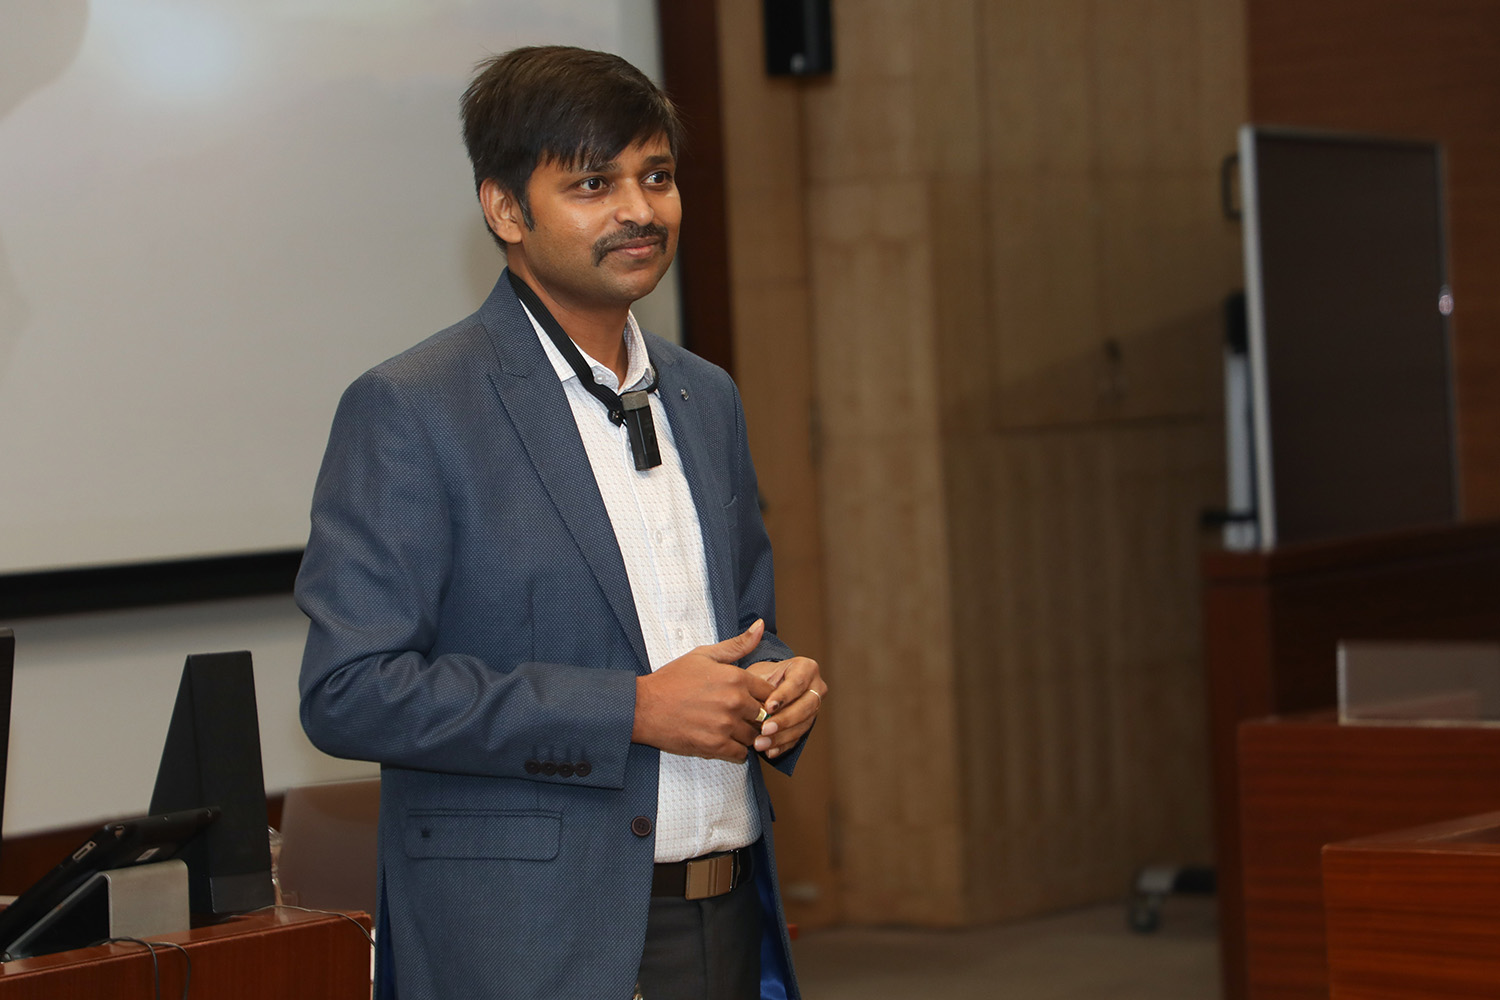 Pradeep Kumar Mishra, Senior Director, Software Engineering – Global Order Management Engineering and Architecture Lead, Dell Technologies, delivers a special lecture on & Digital Leadership Principles & during a session organized by the Executive Post Graduate Programme in Management (EPGP) Seminar Committee as part of its Seminar Series, on 17th May 2023.